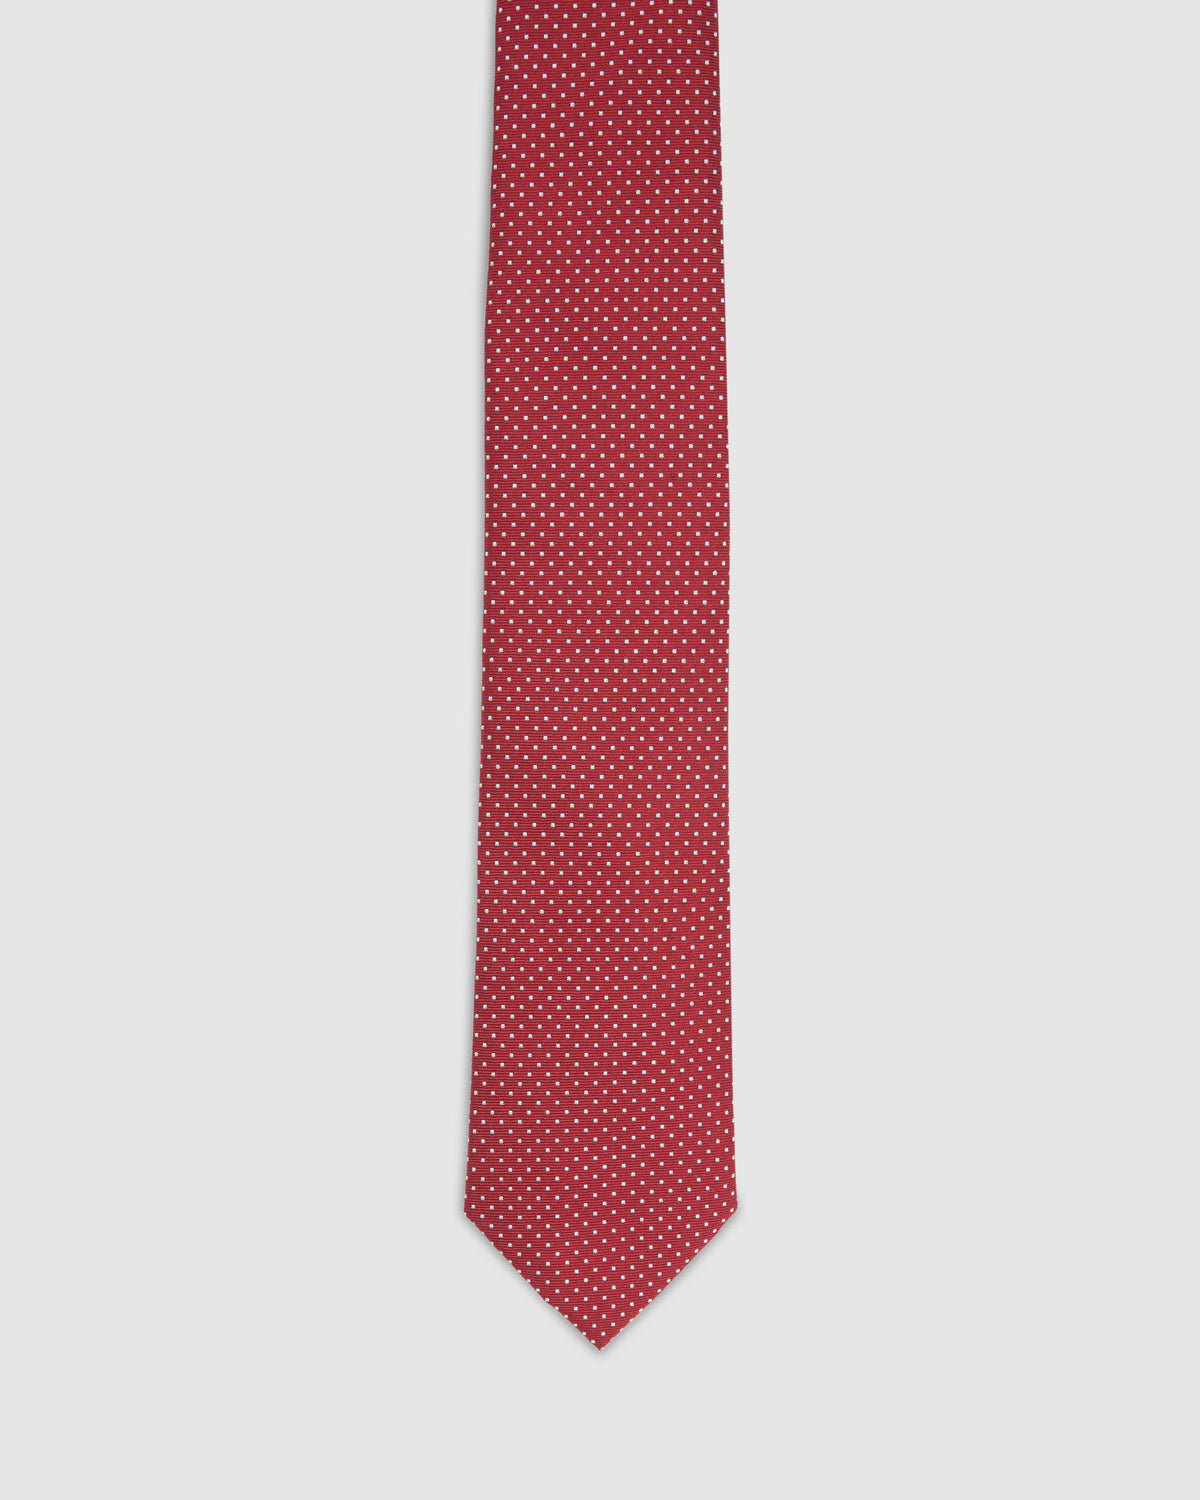 RED POLKA DOTS TIE MENS ACCESSORIES